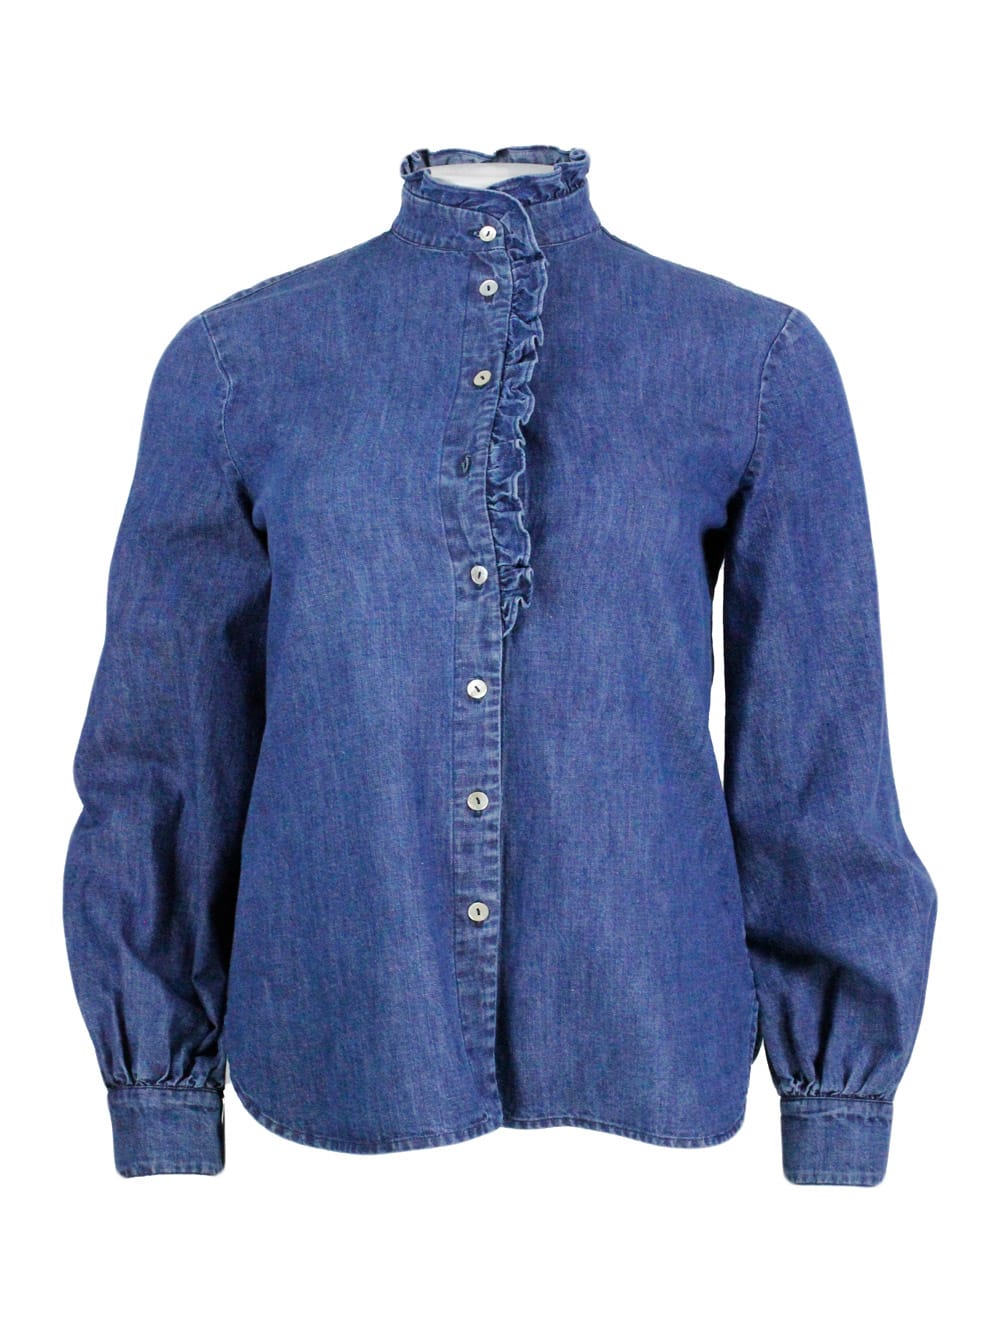 Barba Napoli Long-sleeved Shirt In Fine Denim Embellished With Rouges On The Collar And Along The Buttons. Regula